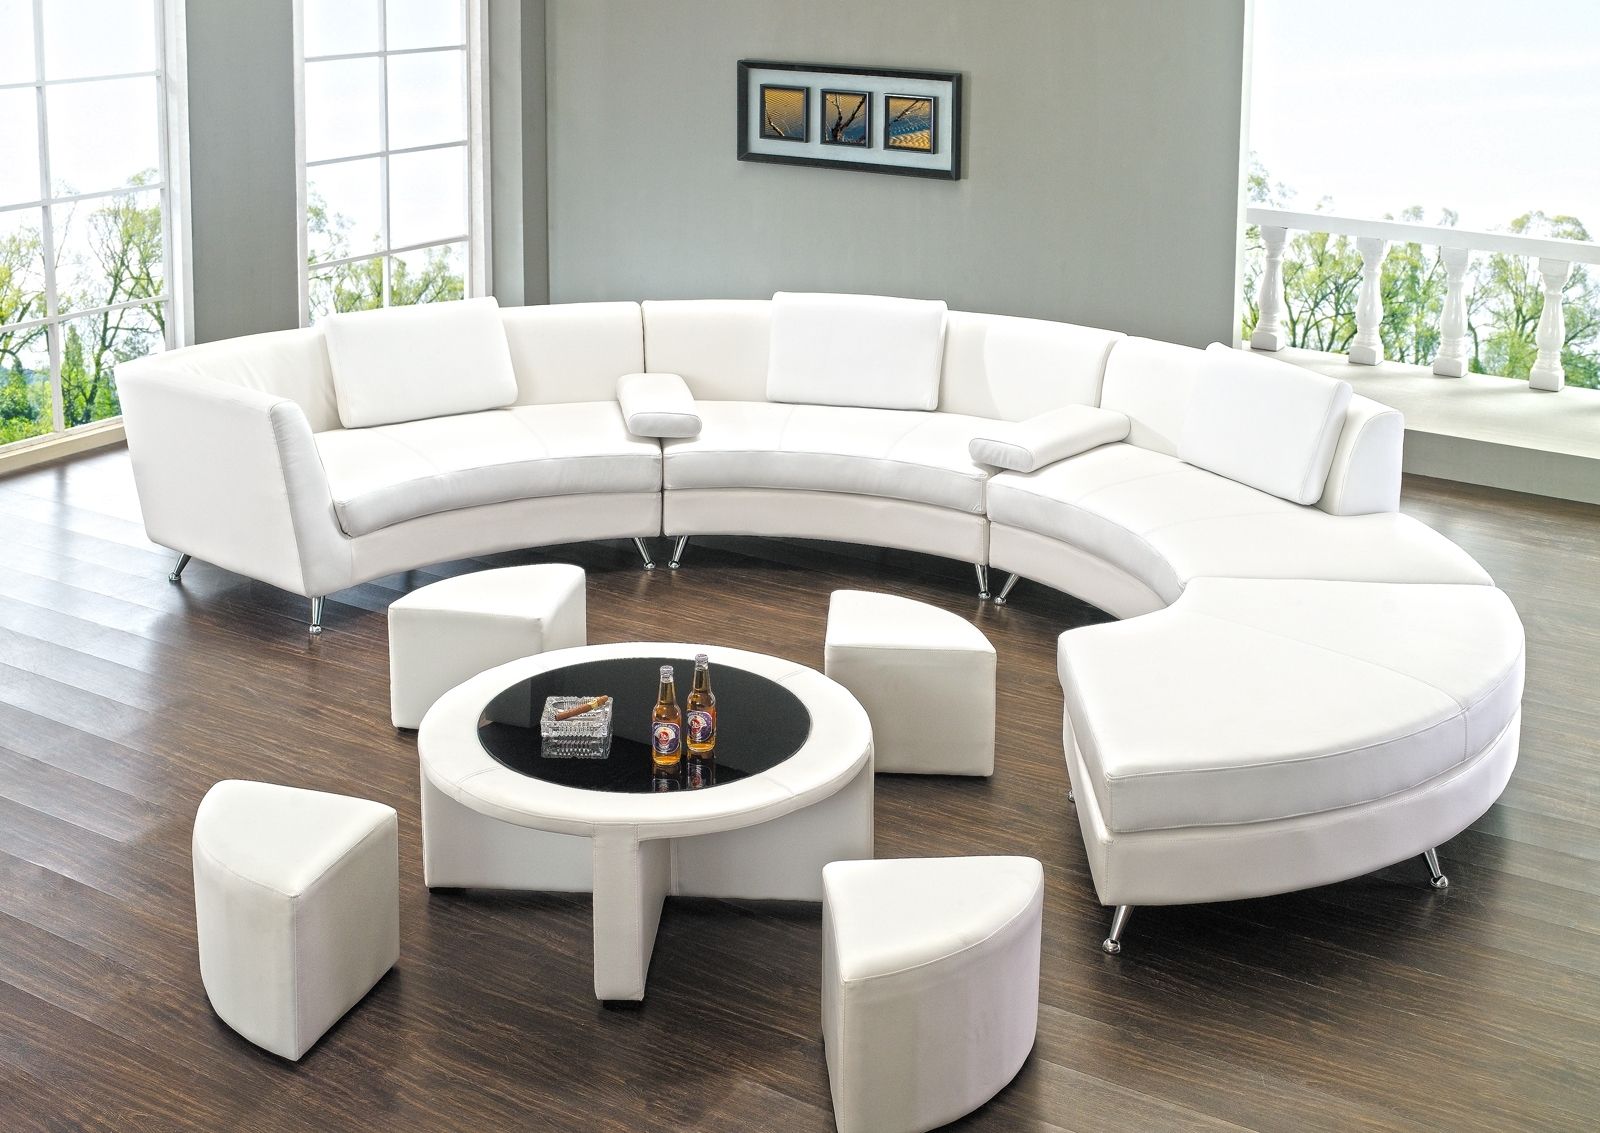 Sofas Center Rounded Sectional Sofa Curved Couch Circle Circular With Circular Sectional Sofa (View 1 of 15)